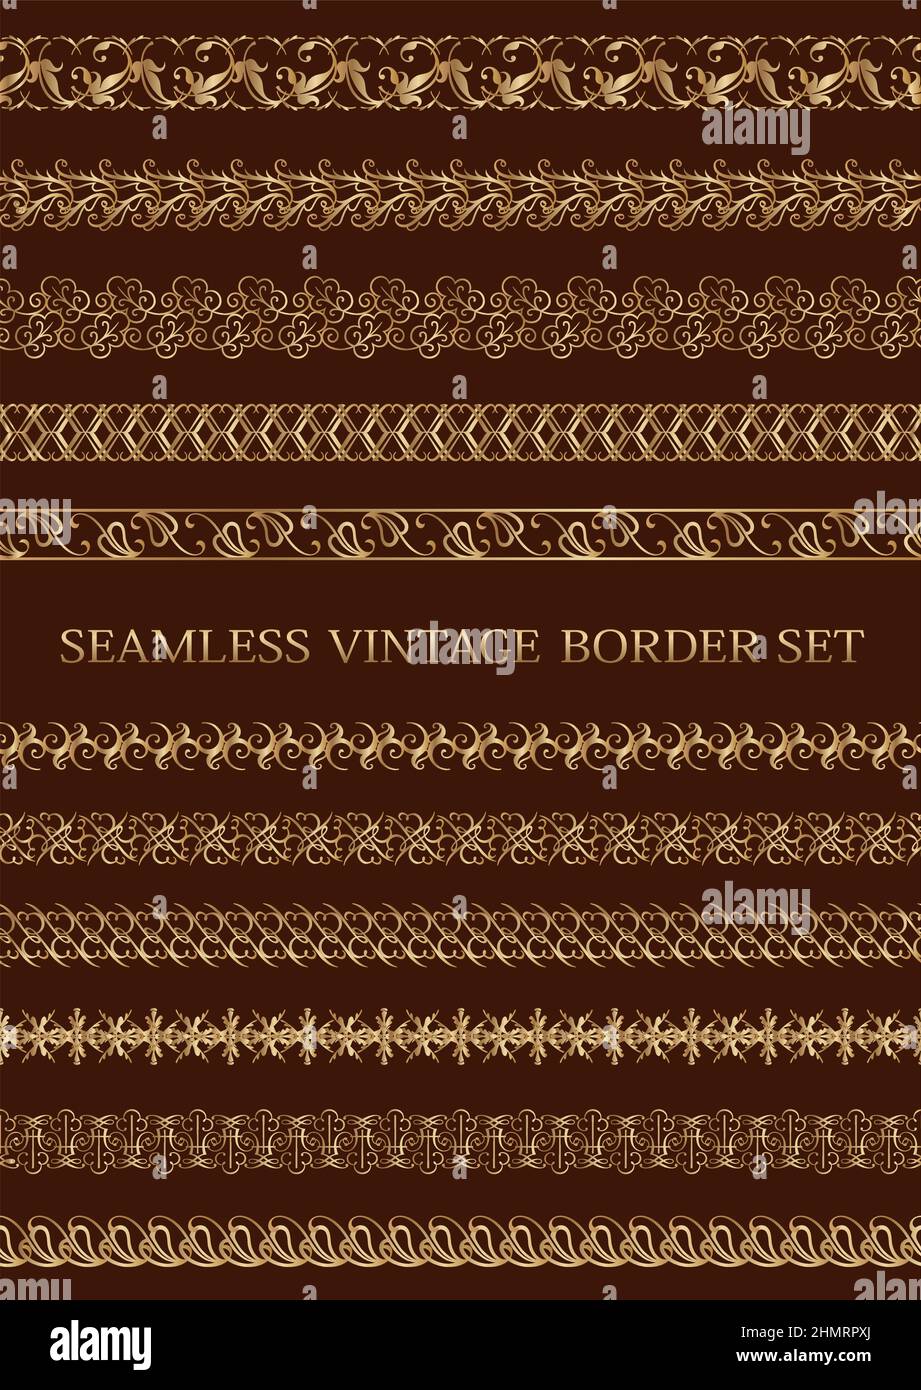 Seamless gold vintage borders set isolated on a dark background. Vector illustration. Horizontally repeatable. Stock Vector